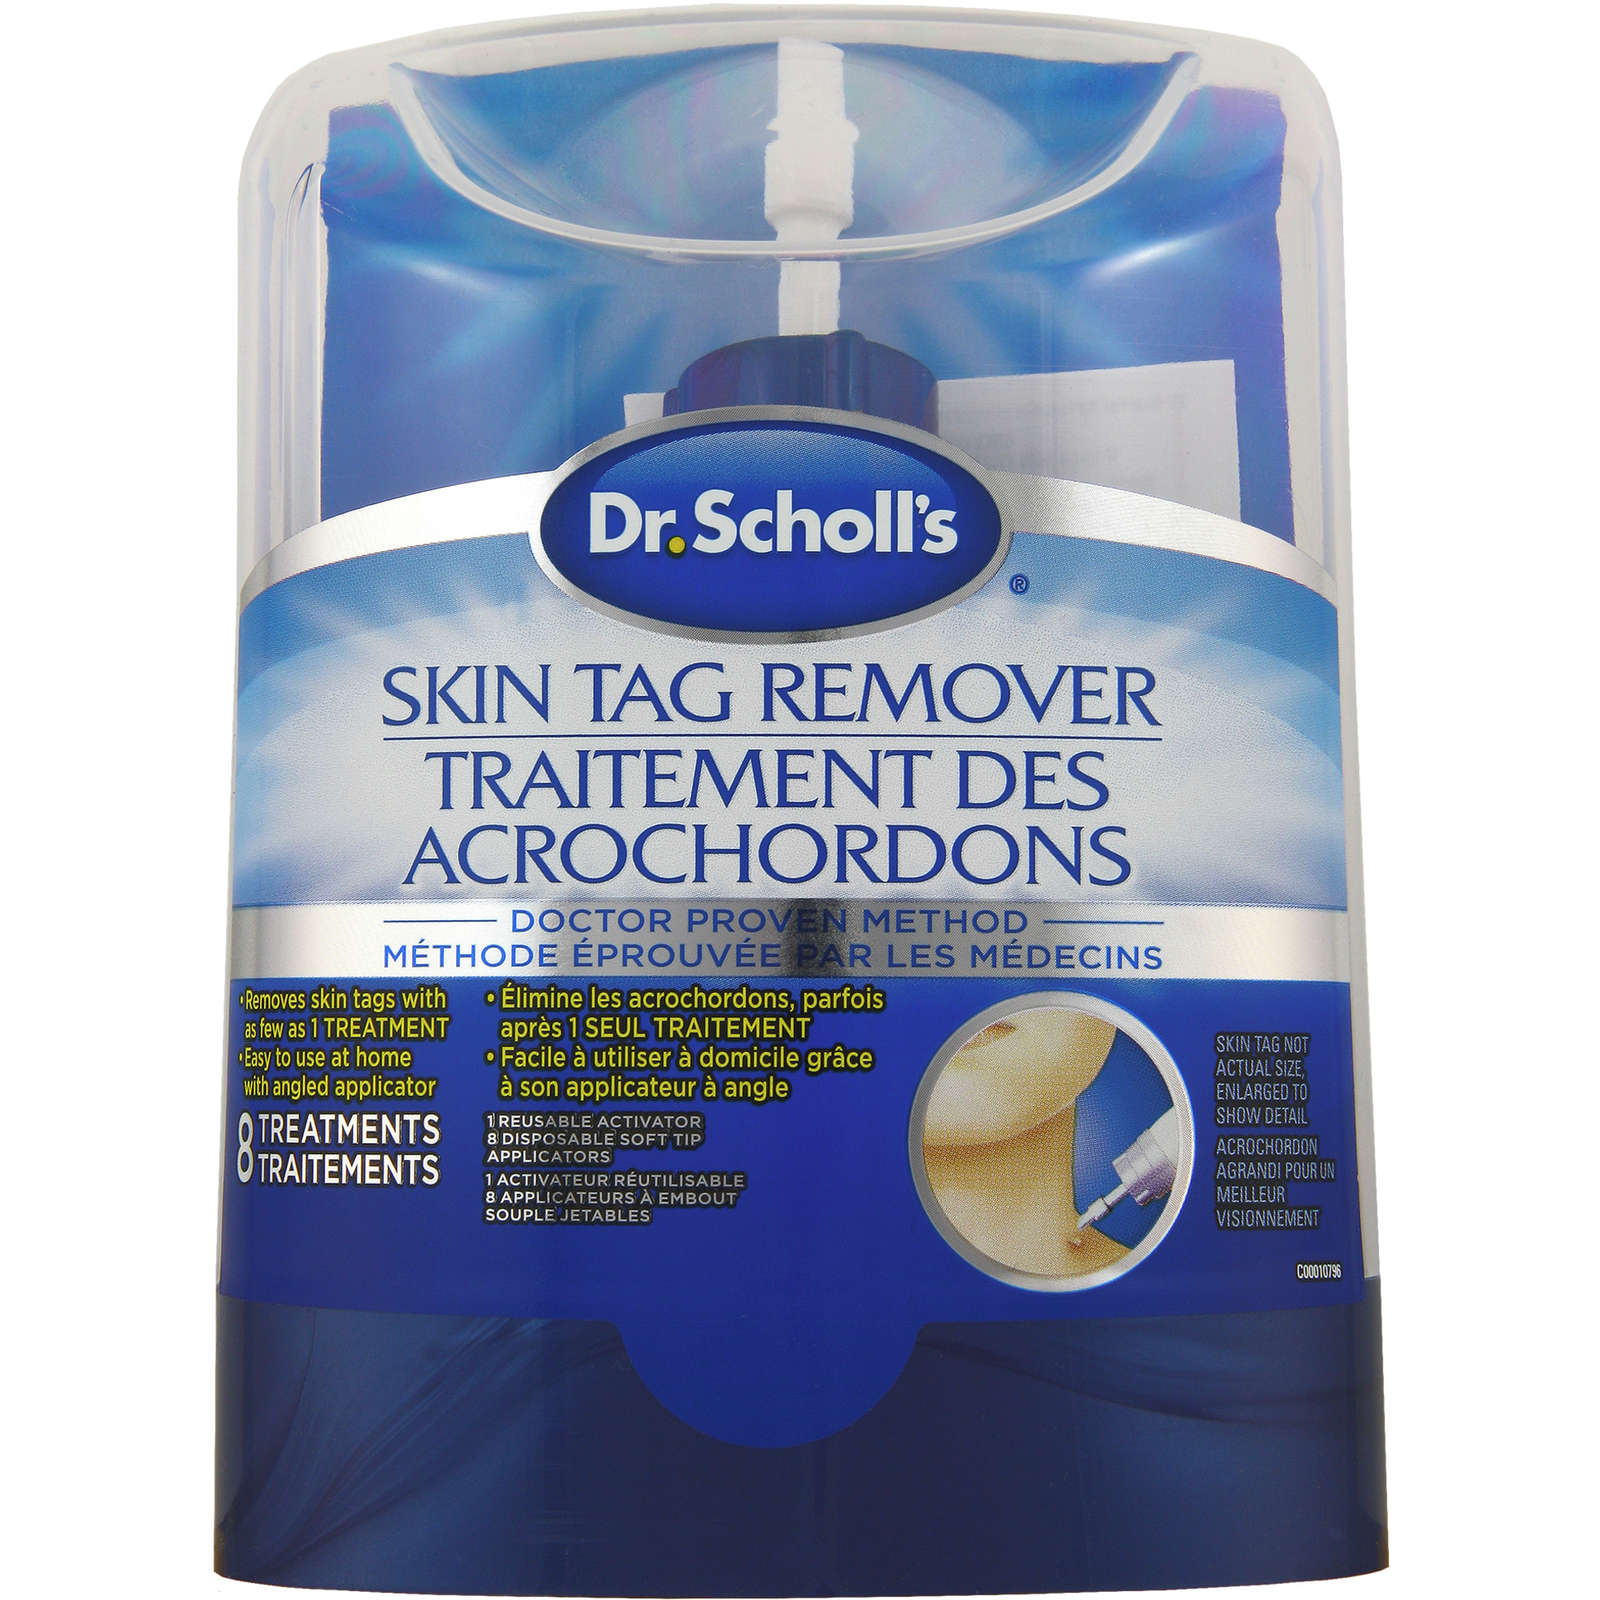 Dr.Scholl's Skin Tag Remover